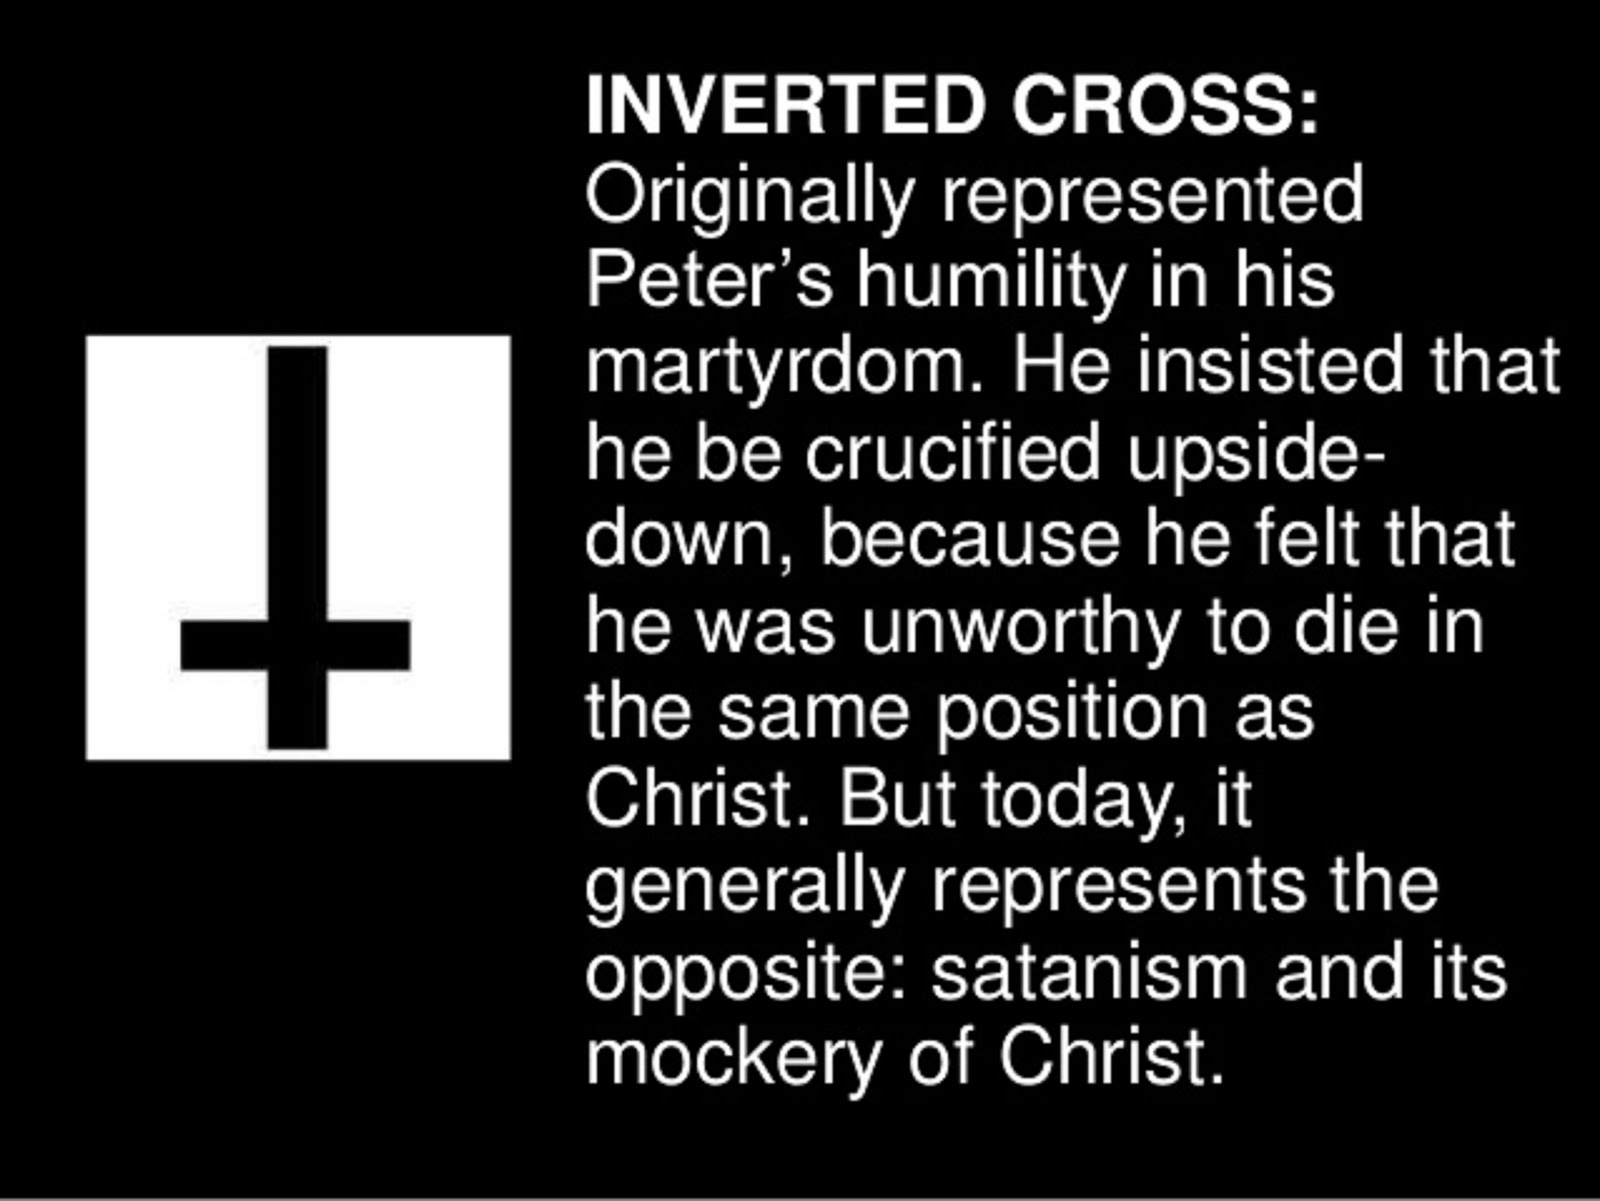 THE INVERTED CROSS OF SAINT PETER -  THE TRUE GOSPEL WAS VEILED WITH THE "SINNER'S PRAYER"